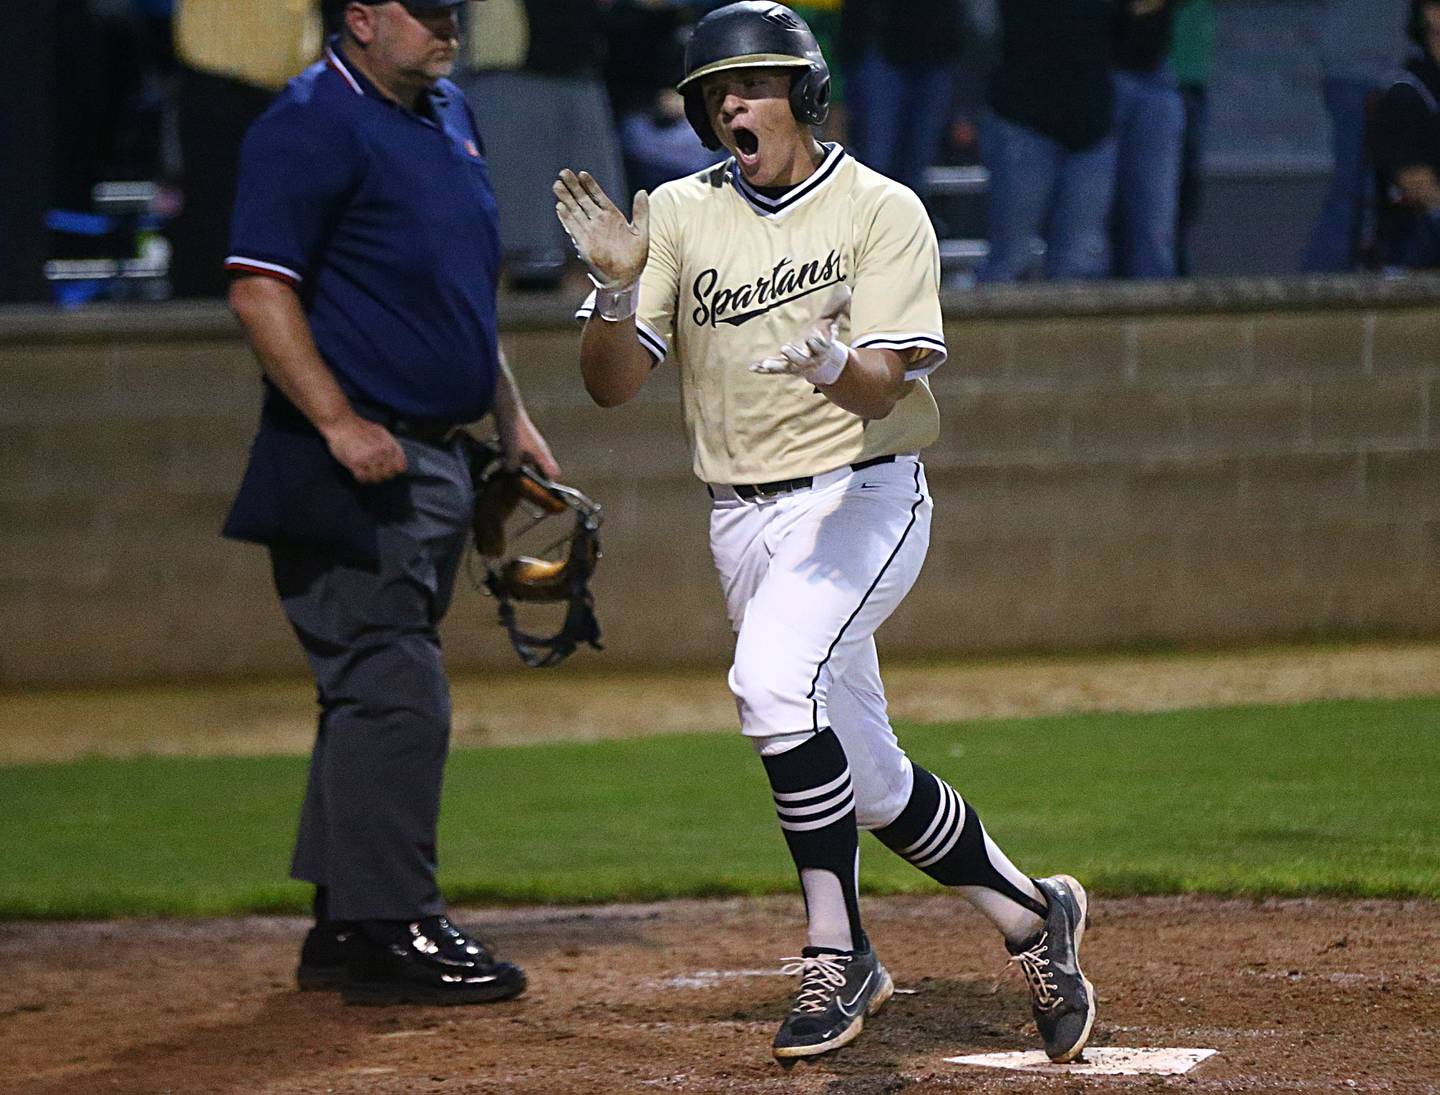 Sycamore's Kiefer Tarnoki reacts after scoring a run against Washington in the Class 3A Supersectional game on Monday, June 6, 2022 in Geneseo.